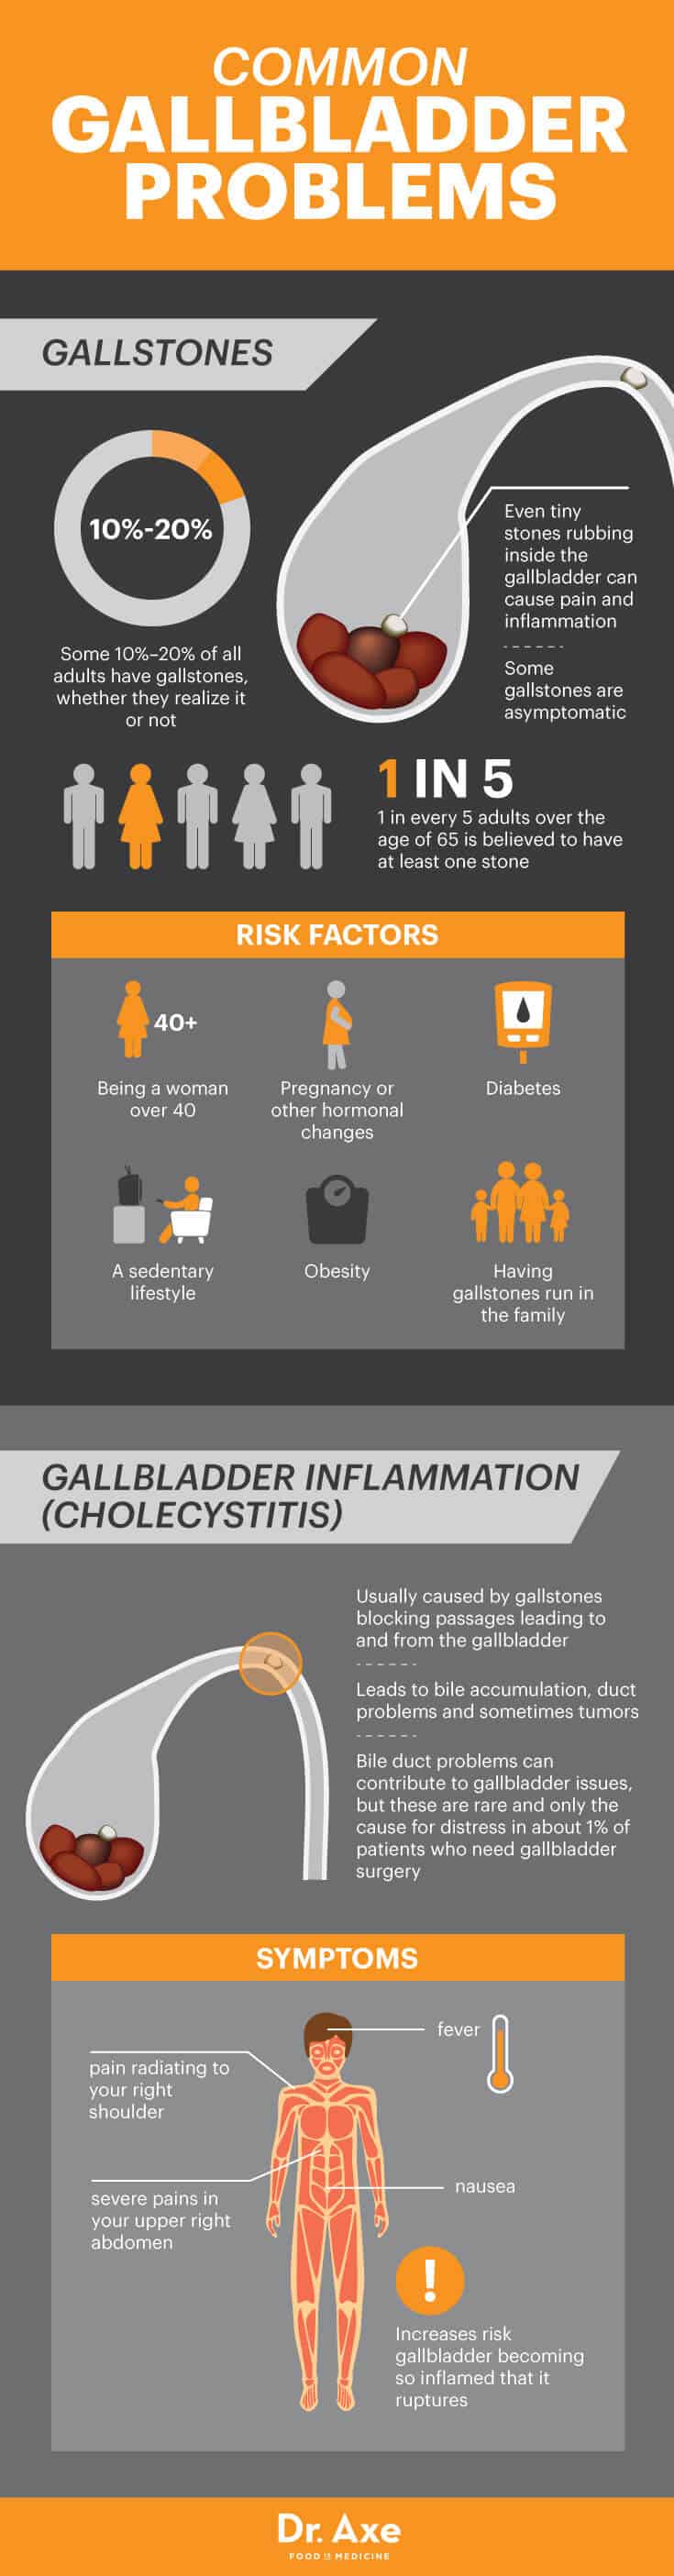 Common gallbladder problems - Dr. Axe